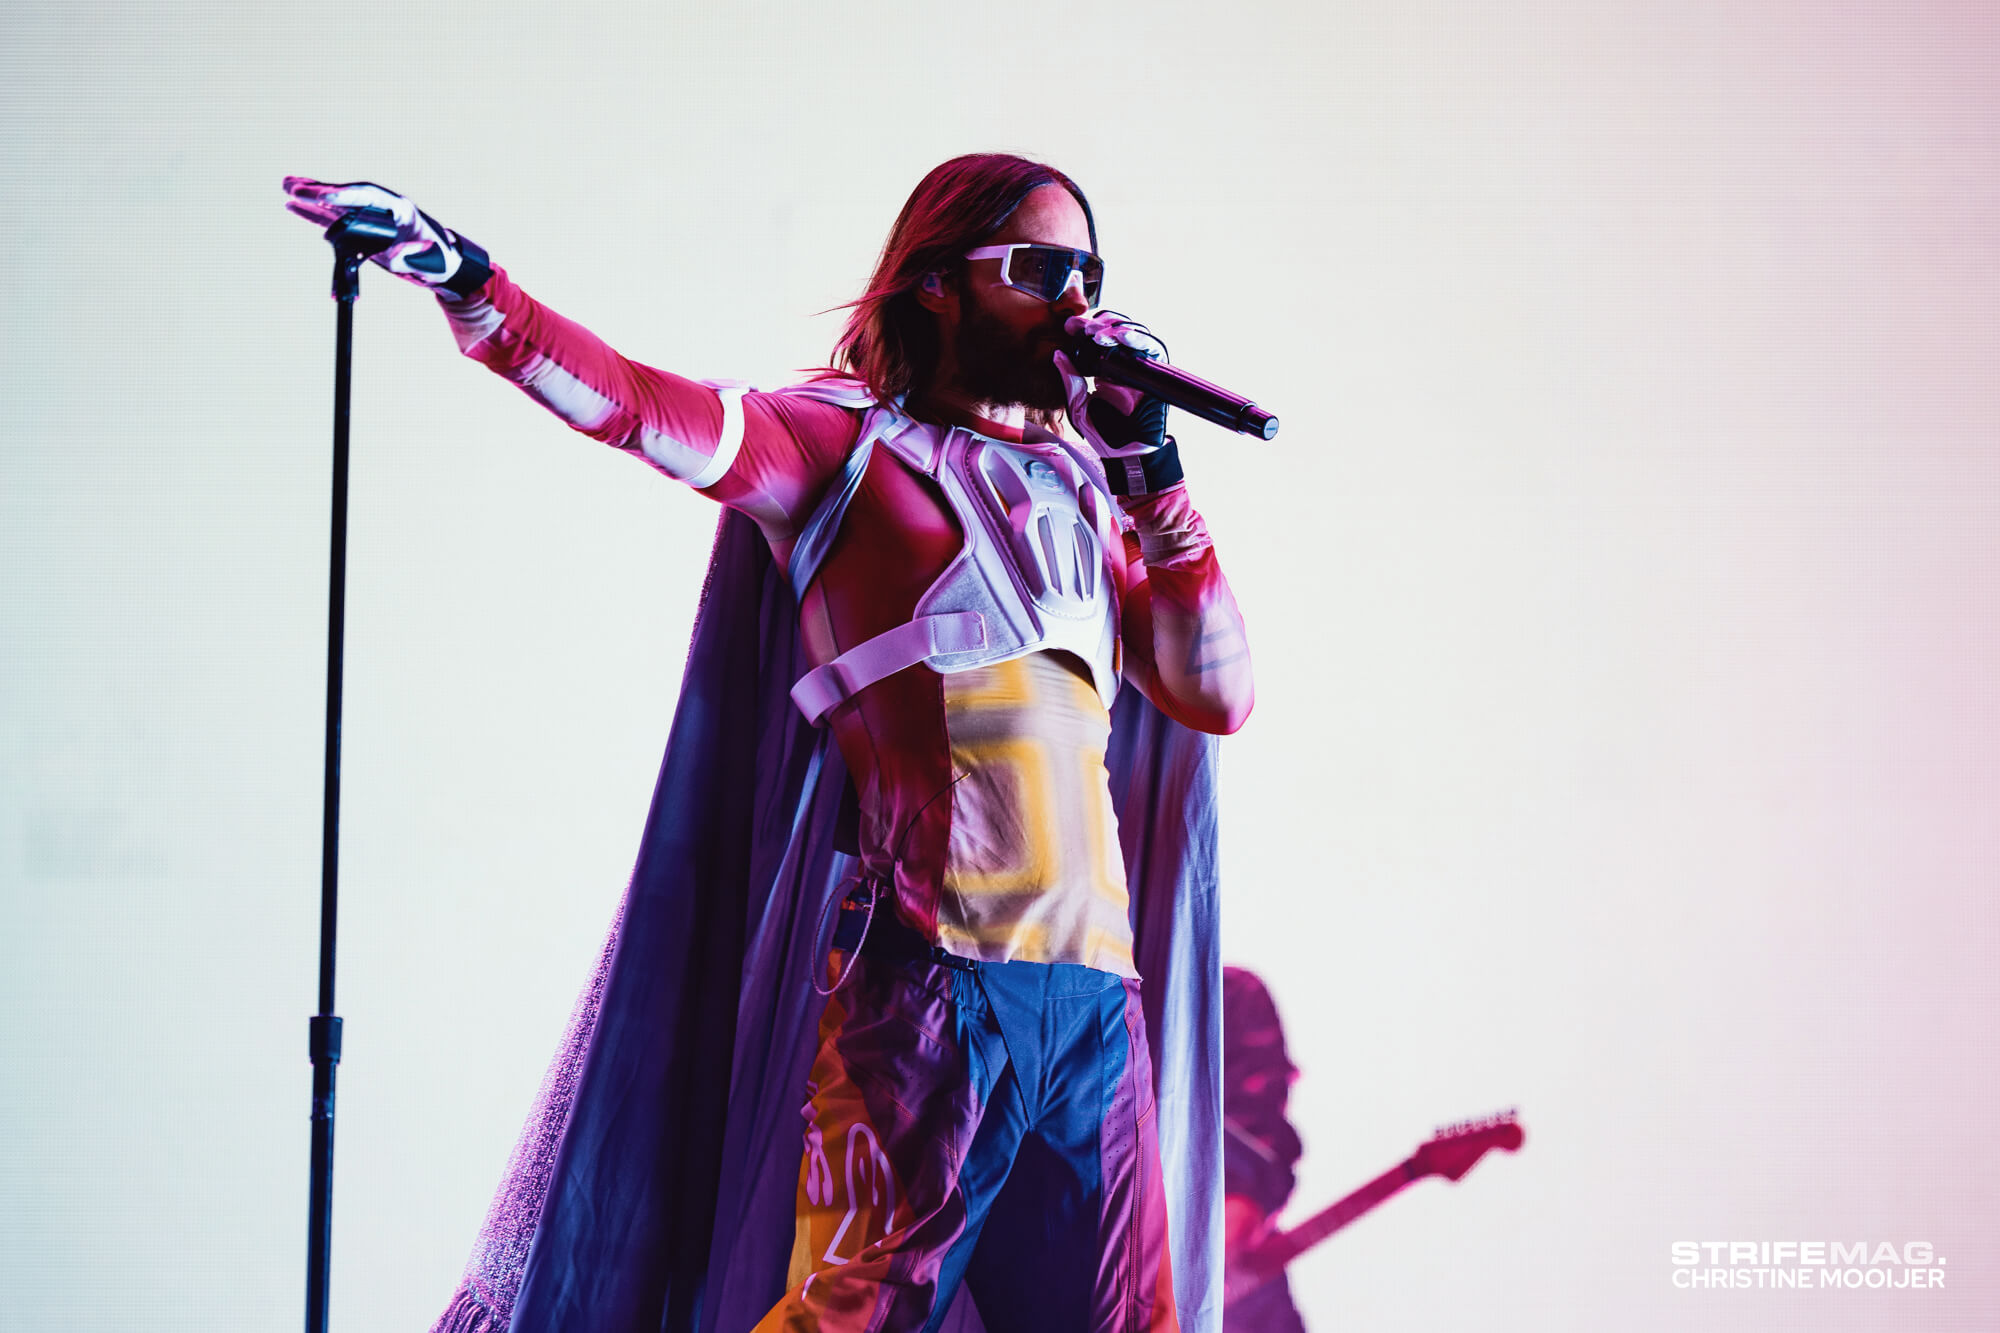 30 Seconds To Mars @ When We Were Young Fest